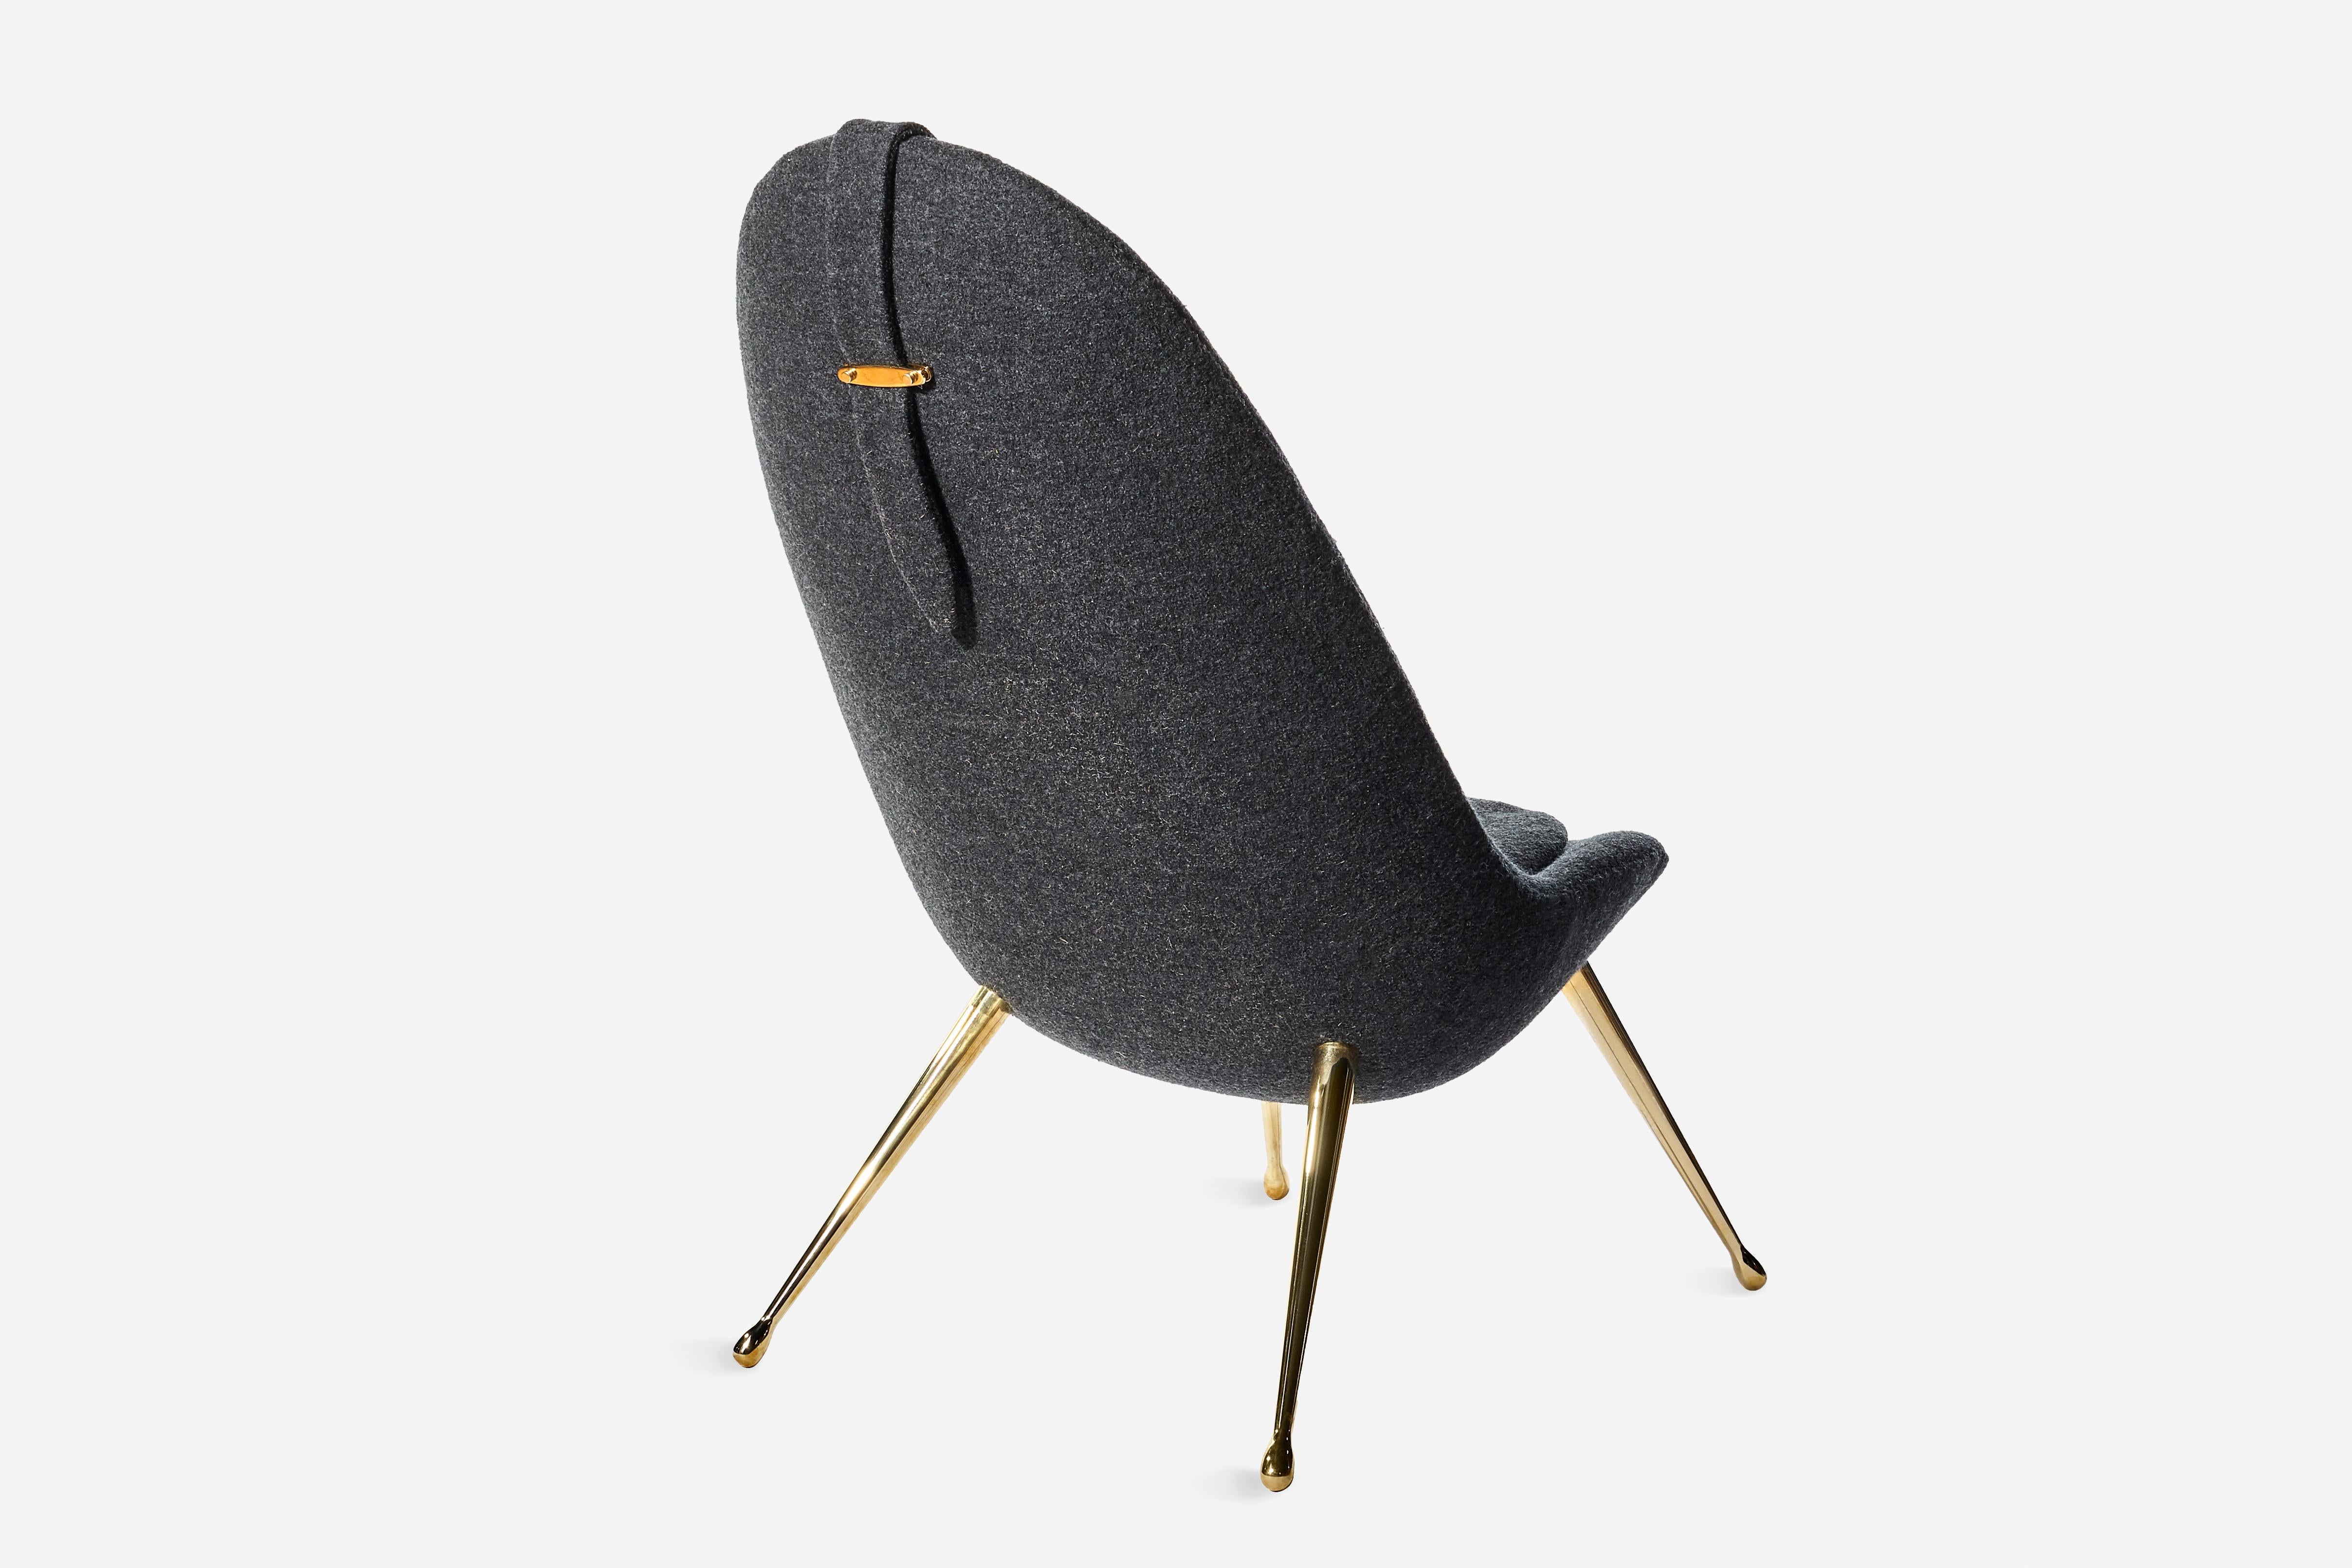 The Pause Chaise Lounge is upholstered with graded-in fabric or COM and features solid brass legs. With a fiberglass shell designed to embrace the body, this sculptural lounge chair is intended as the ultimate seat to unplug and unwind in.